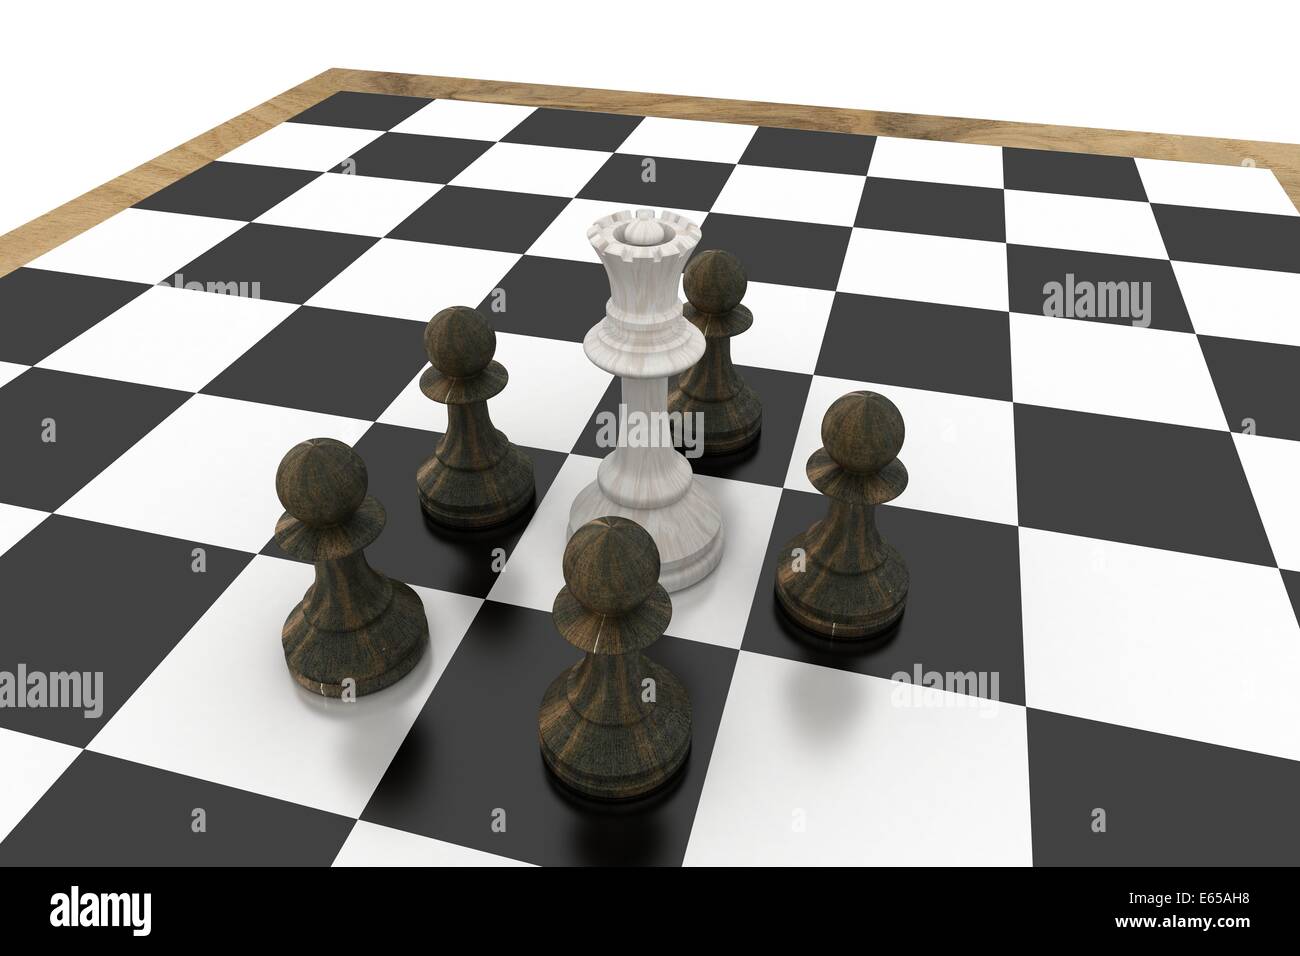 White queen surrounded by black pawns Stock Photo